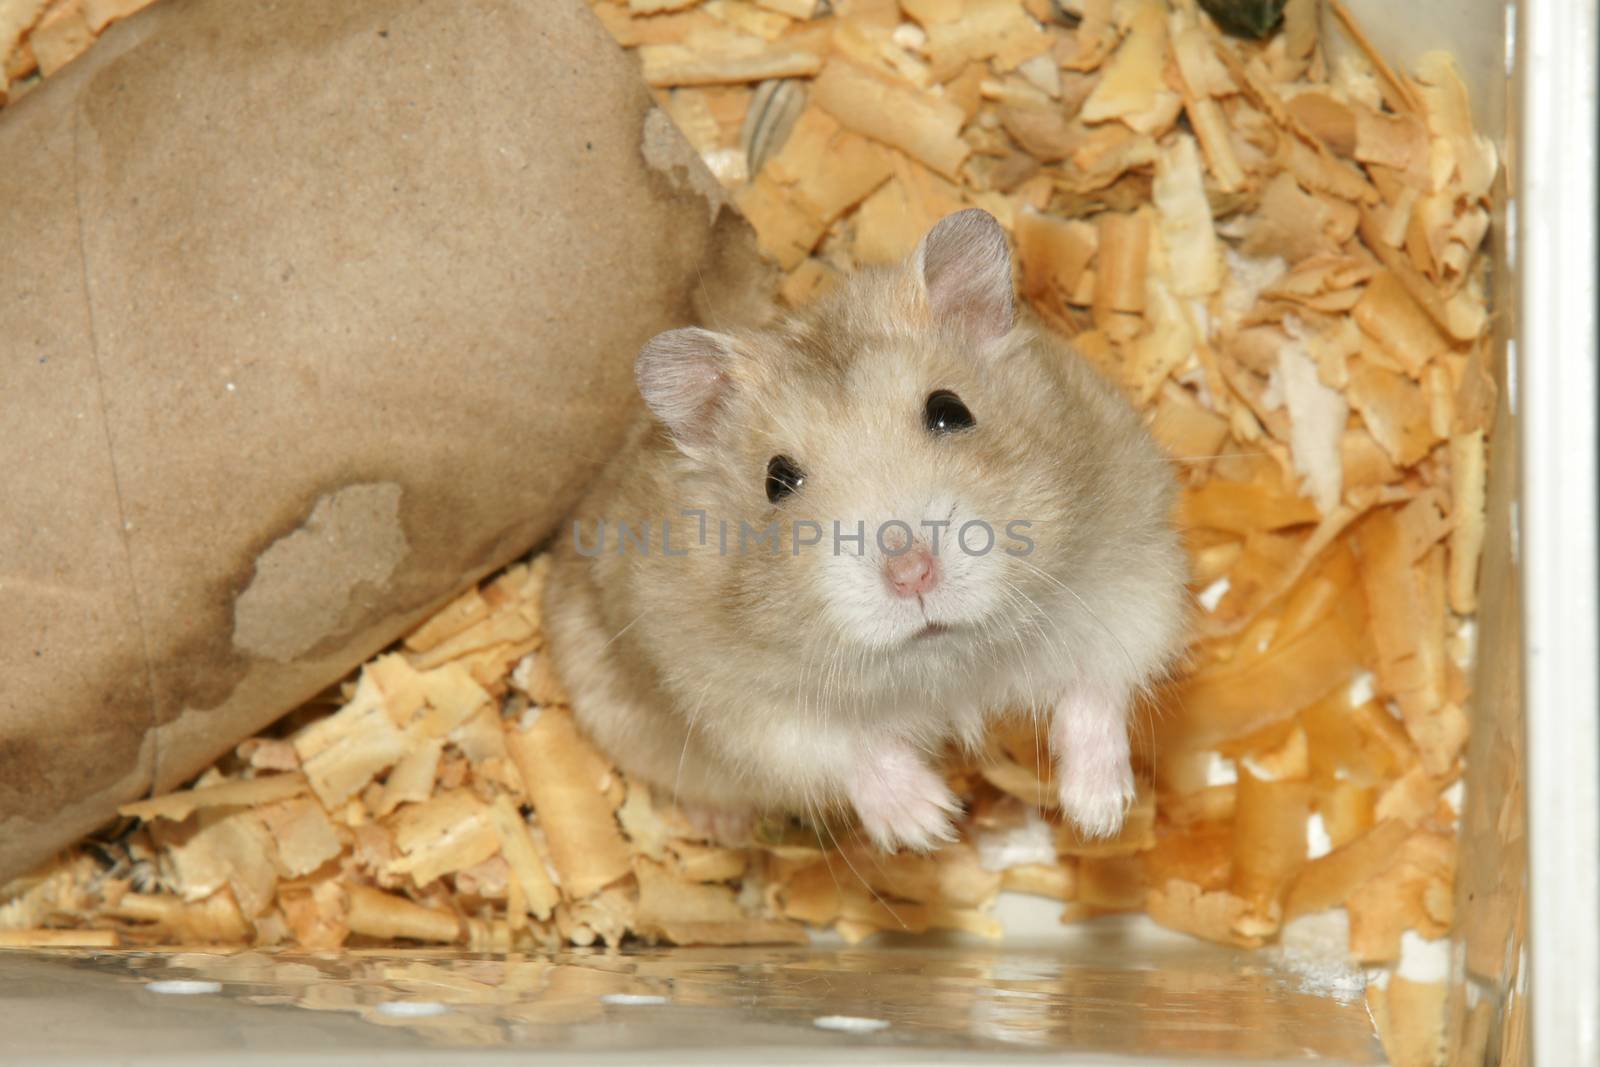 Cute hamster in sawdust wooden house